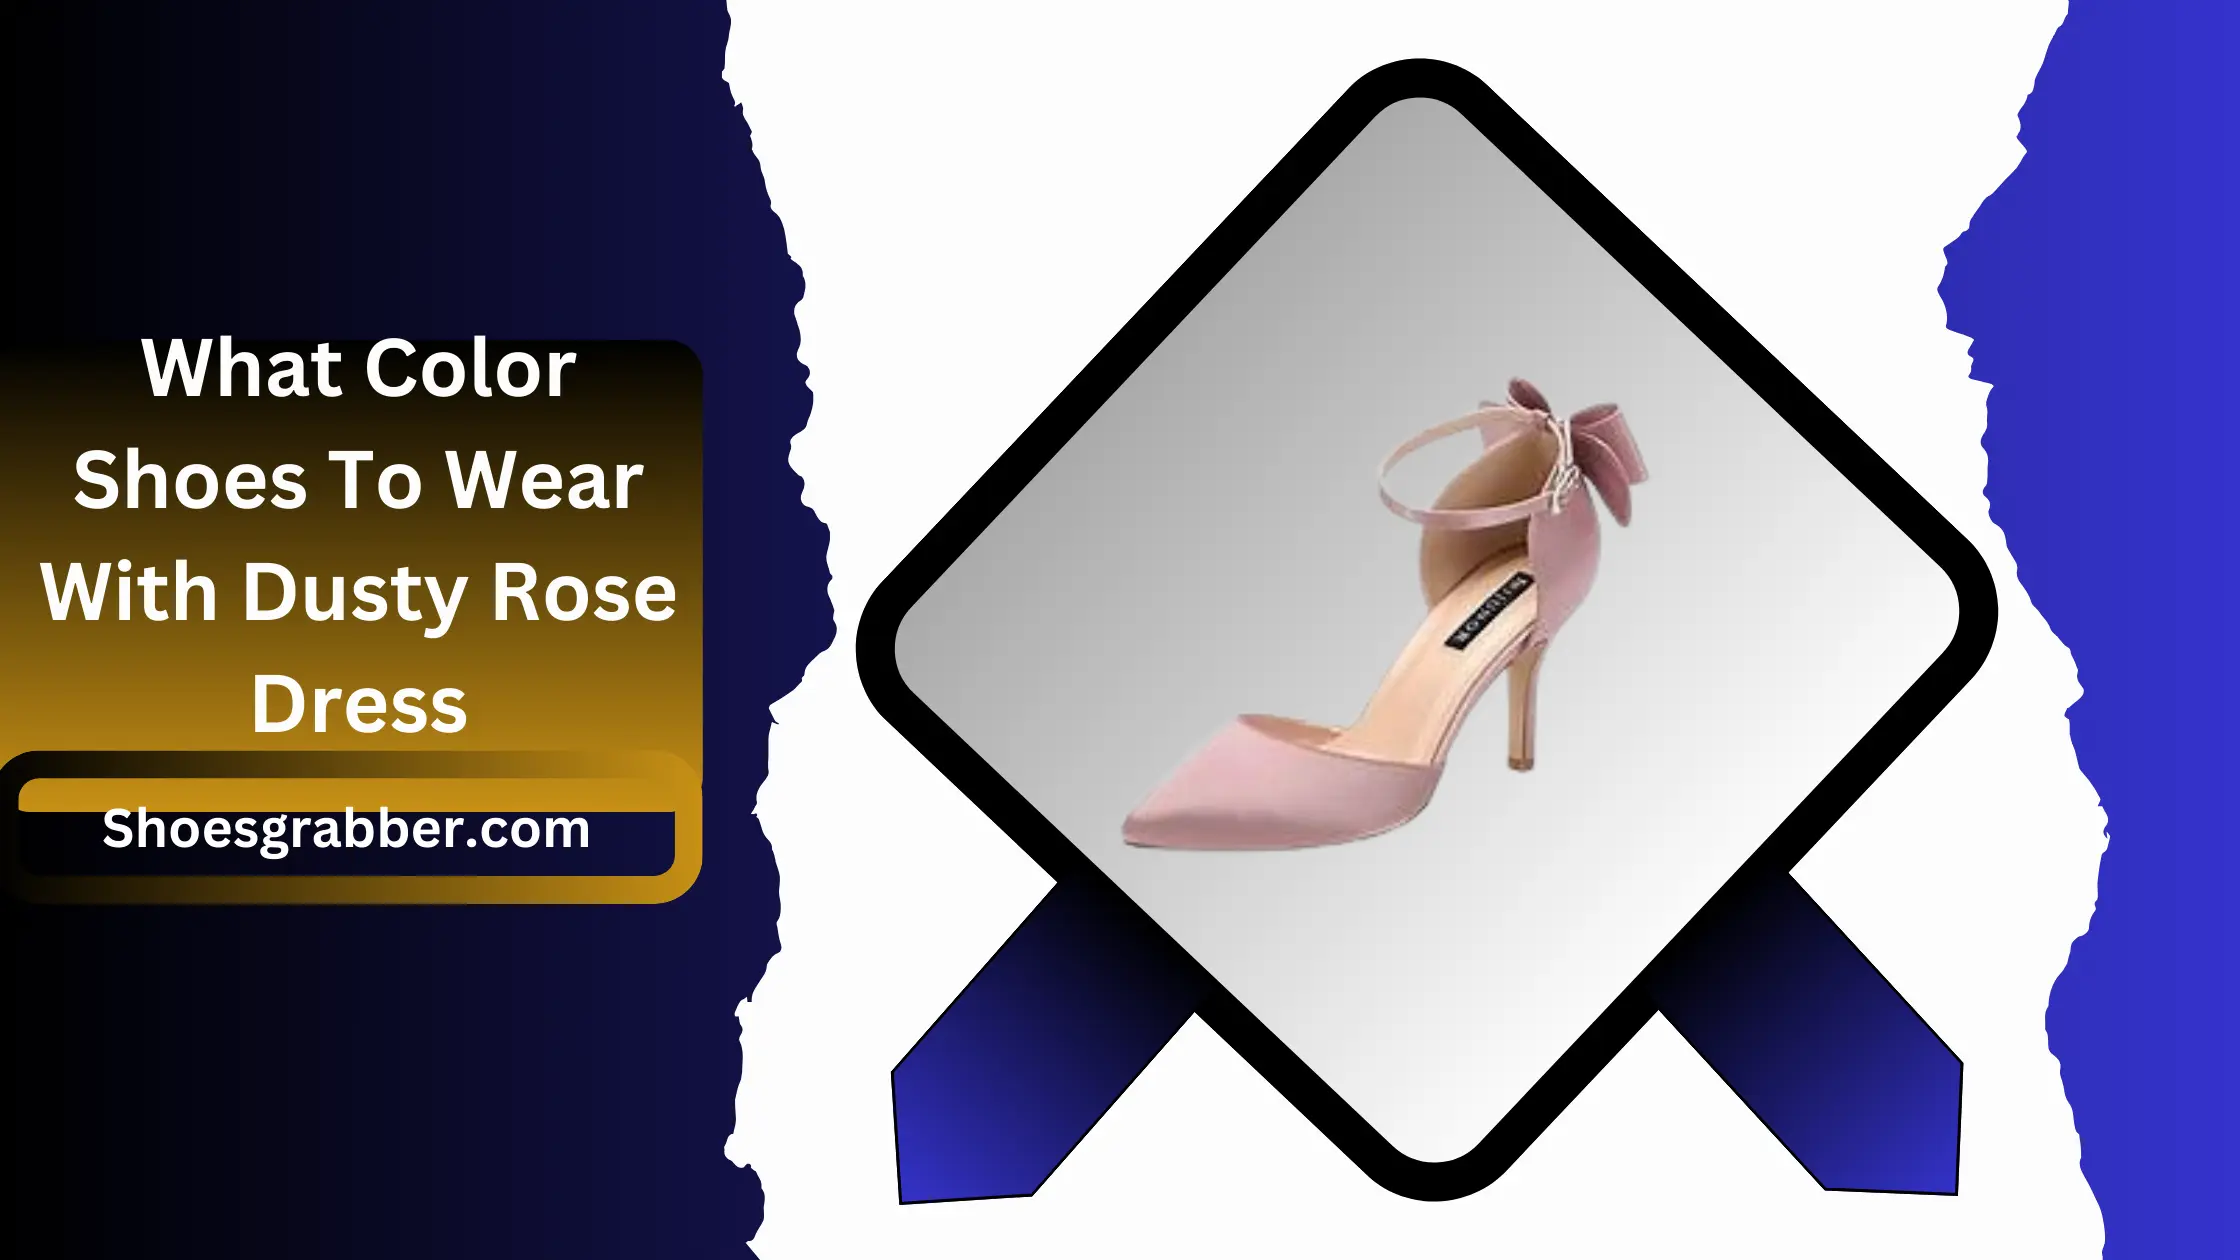 What Color Shoes To Wear With Dusty Rose Dress - Complete Your Look